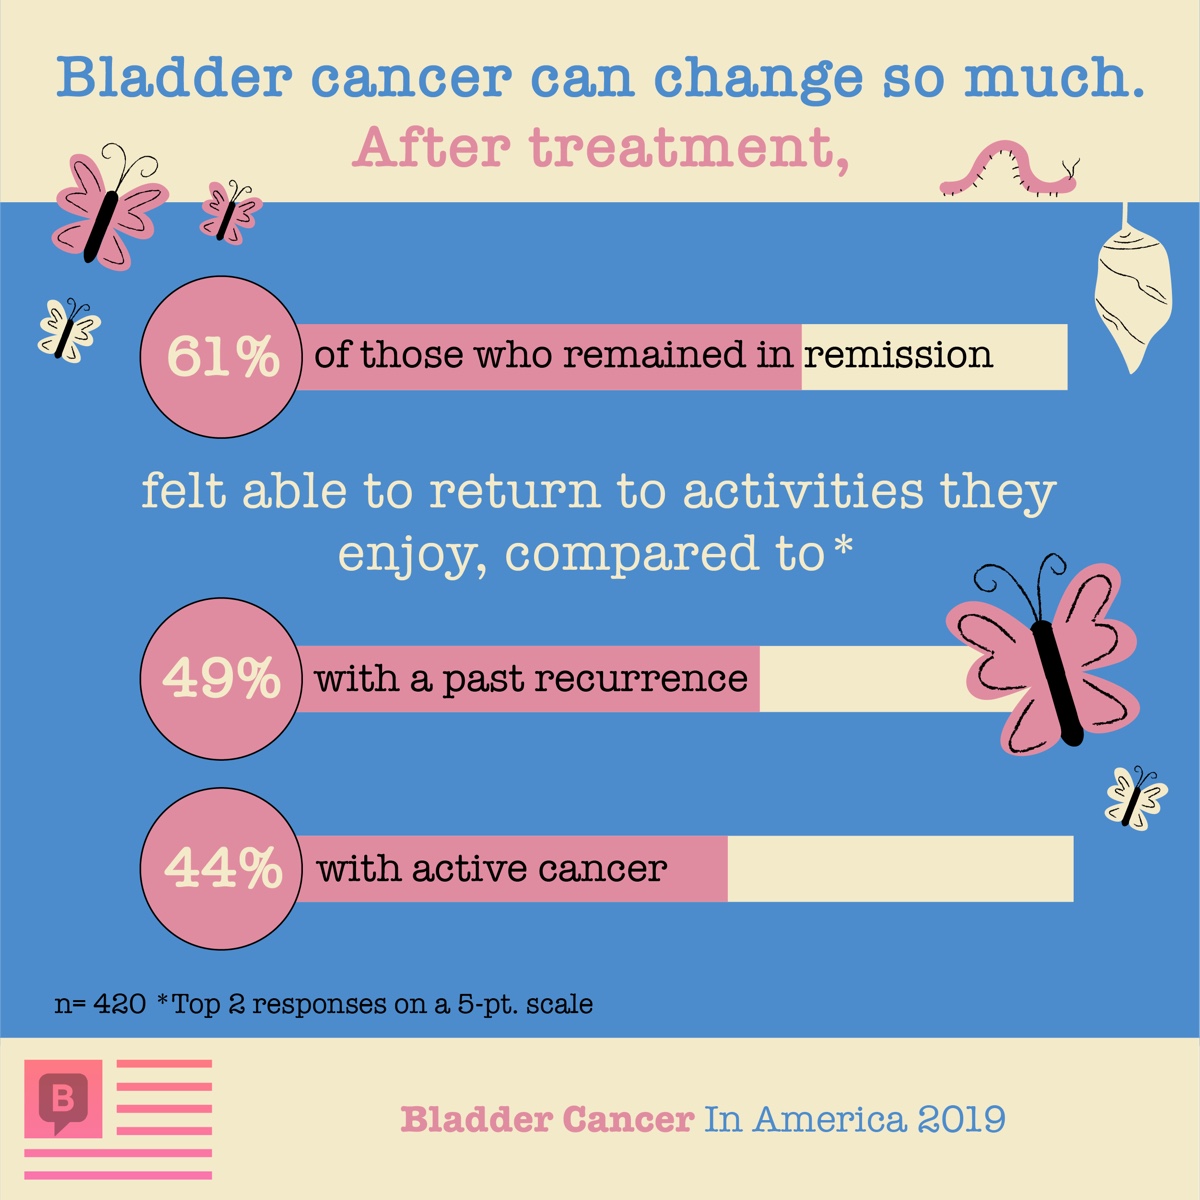 After treatment, only about half of those with active cancer or past recurrence return to activities they enjoy